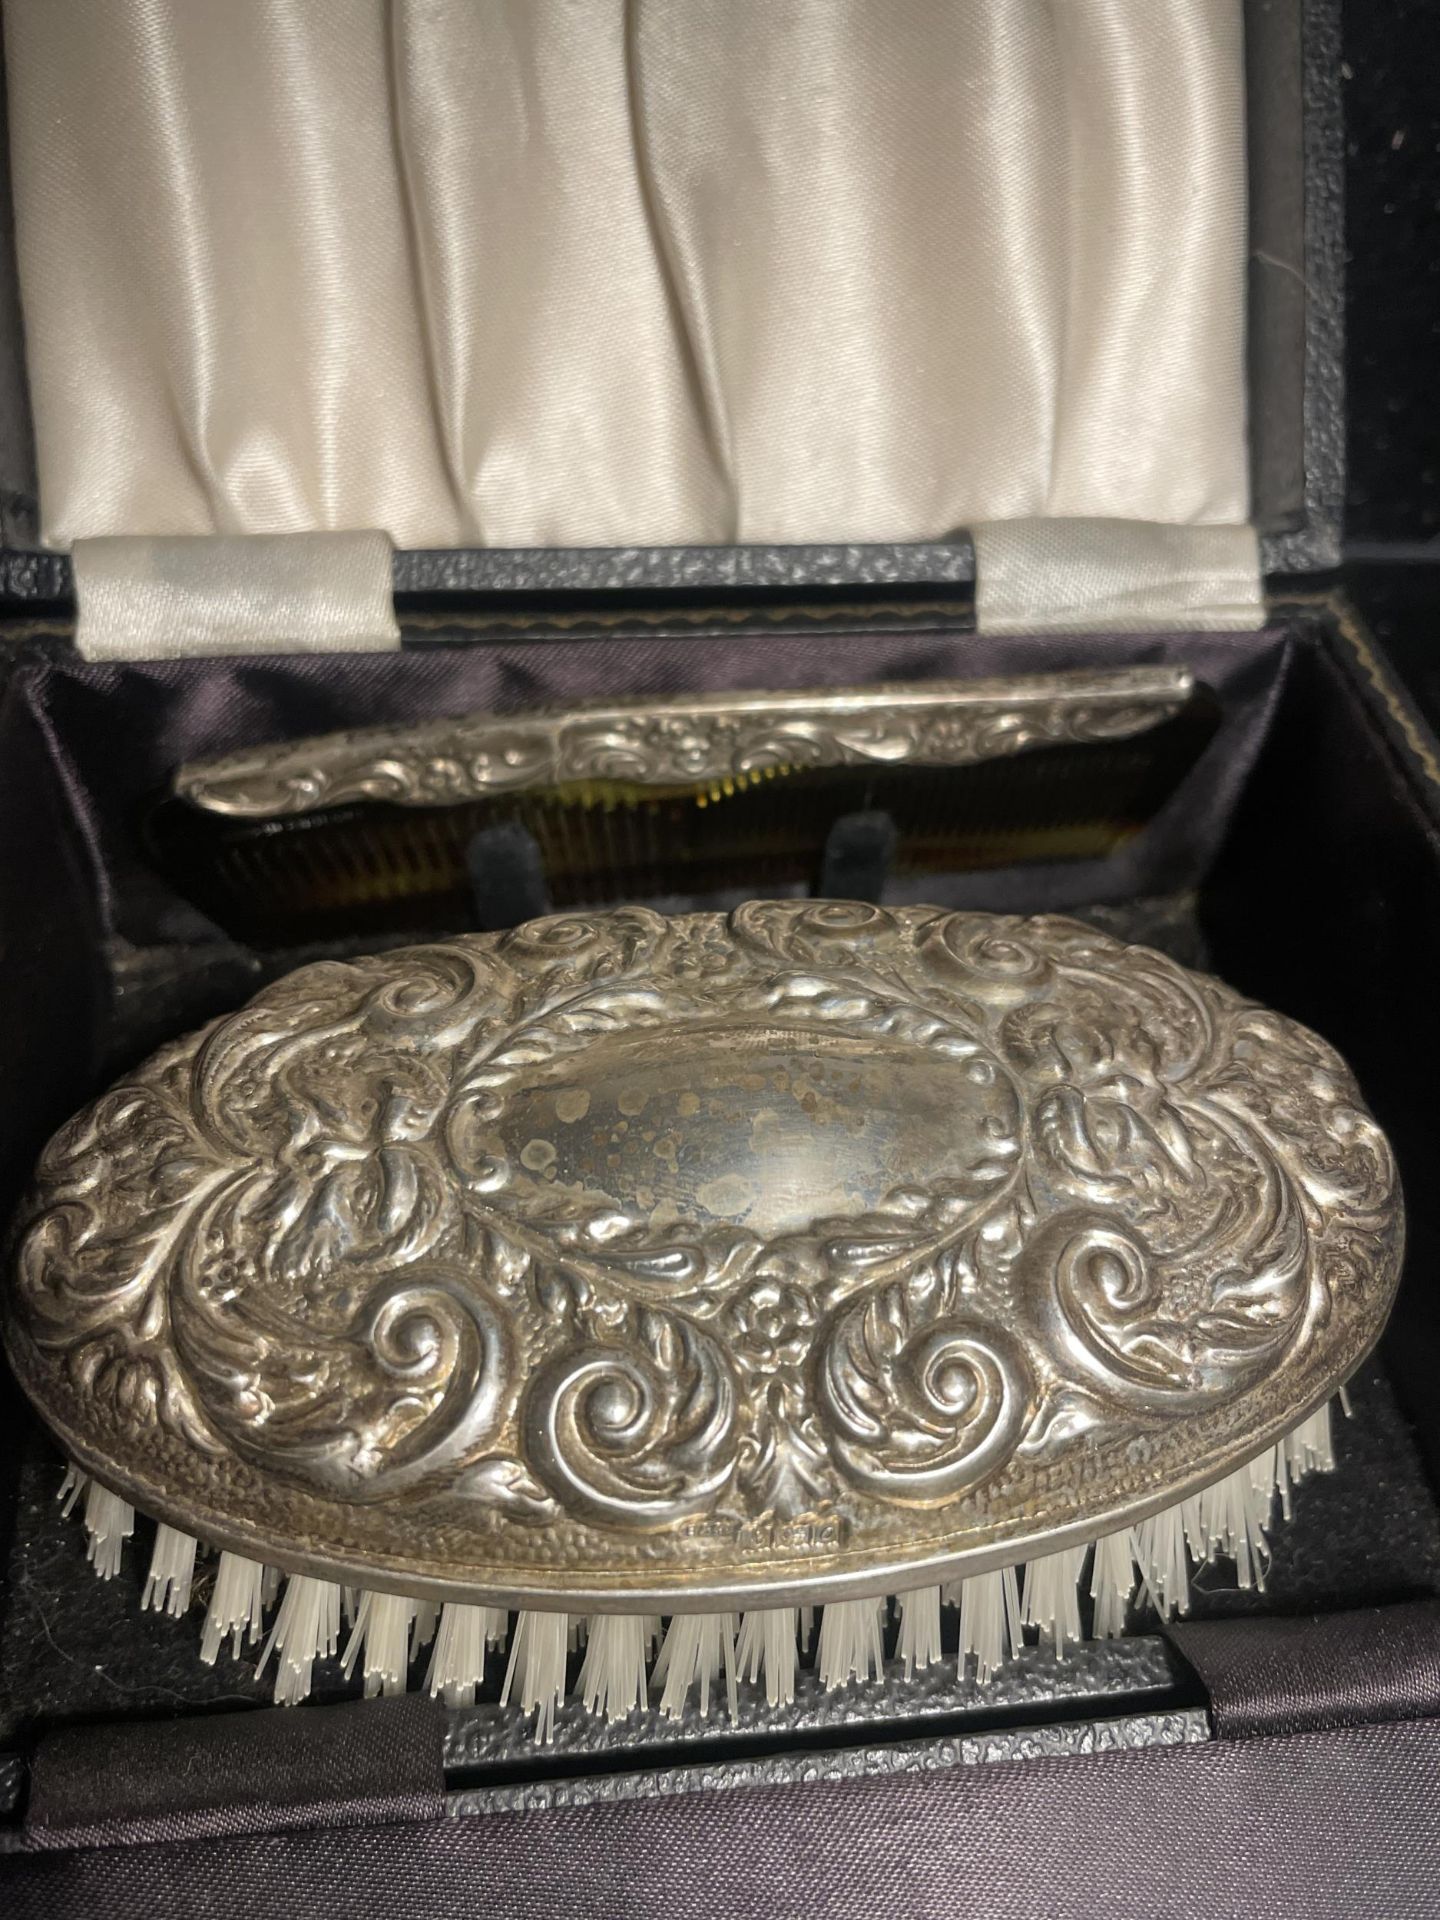 A HALLMARKED BIRMINGHAM SILVER BRUSH AND COMB SET IN A PRESENTATION BOX - Image 2 of 4